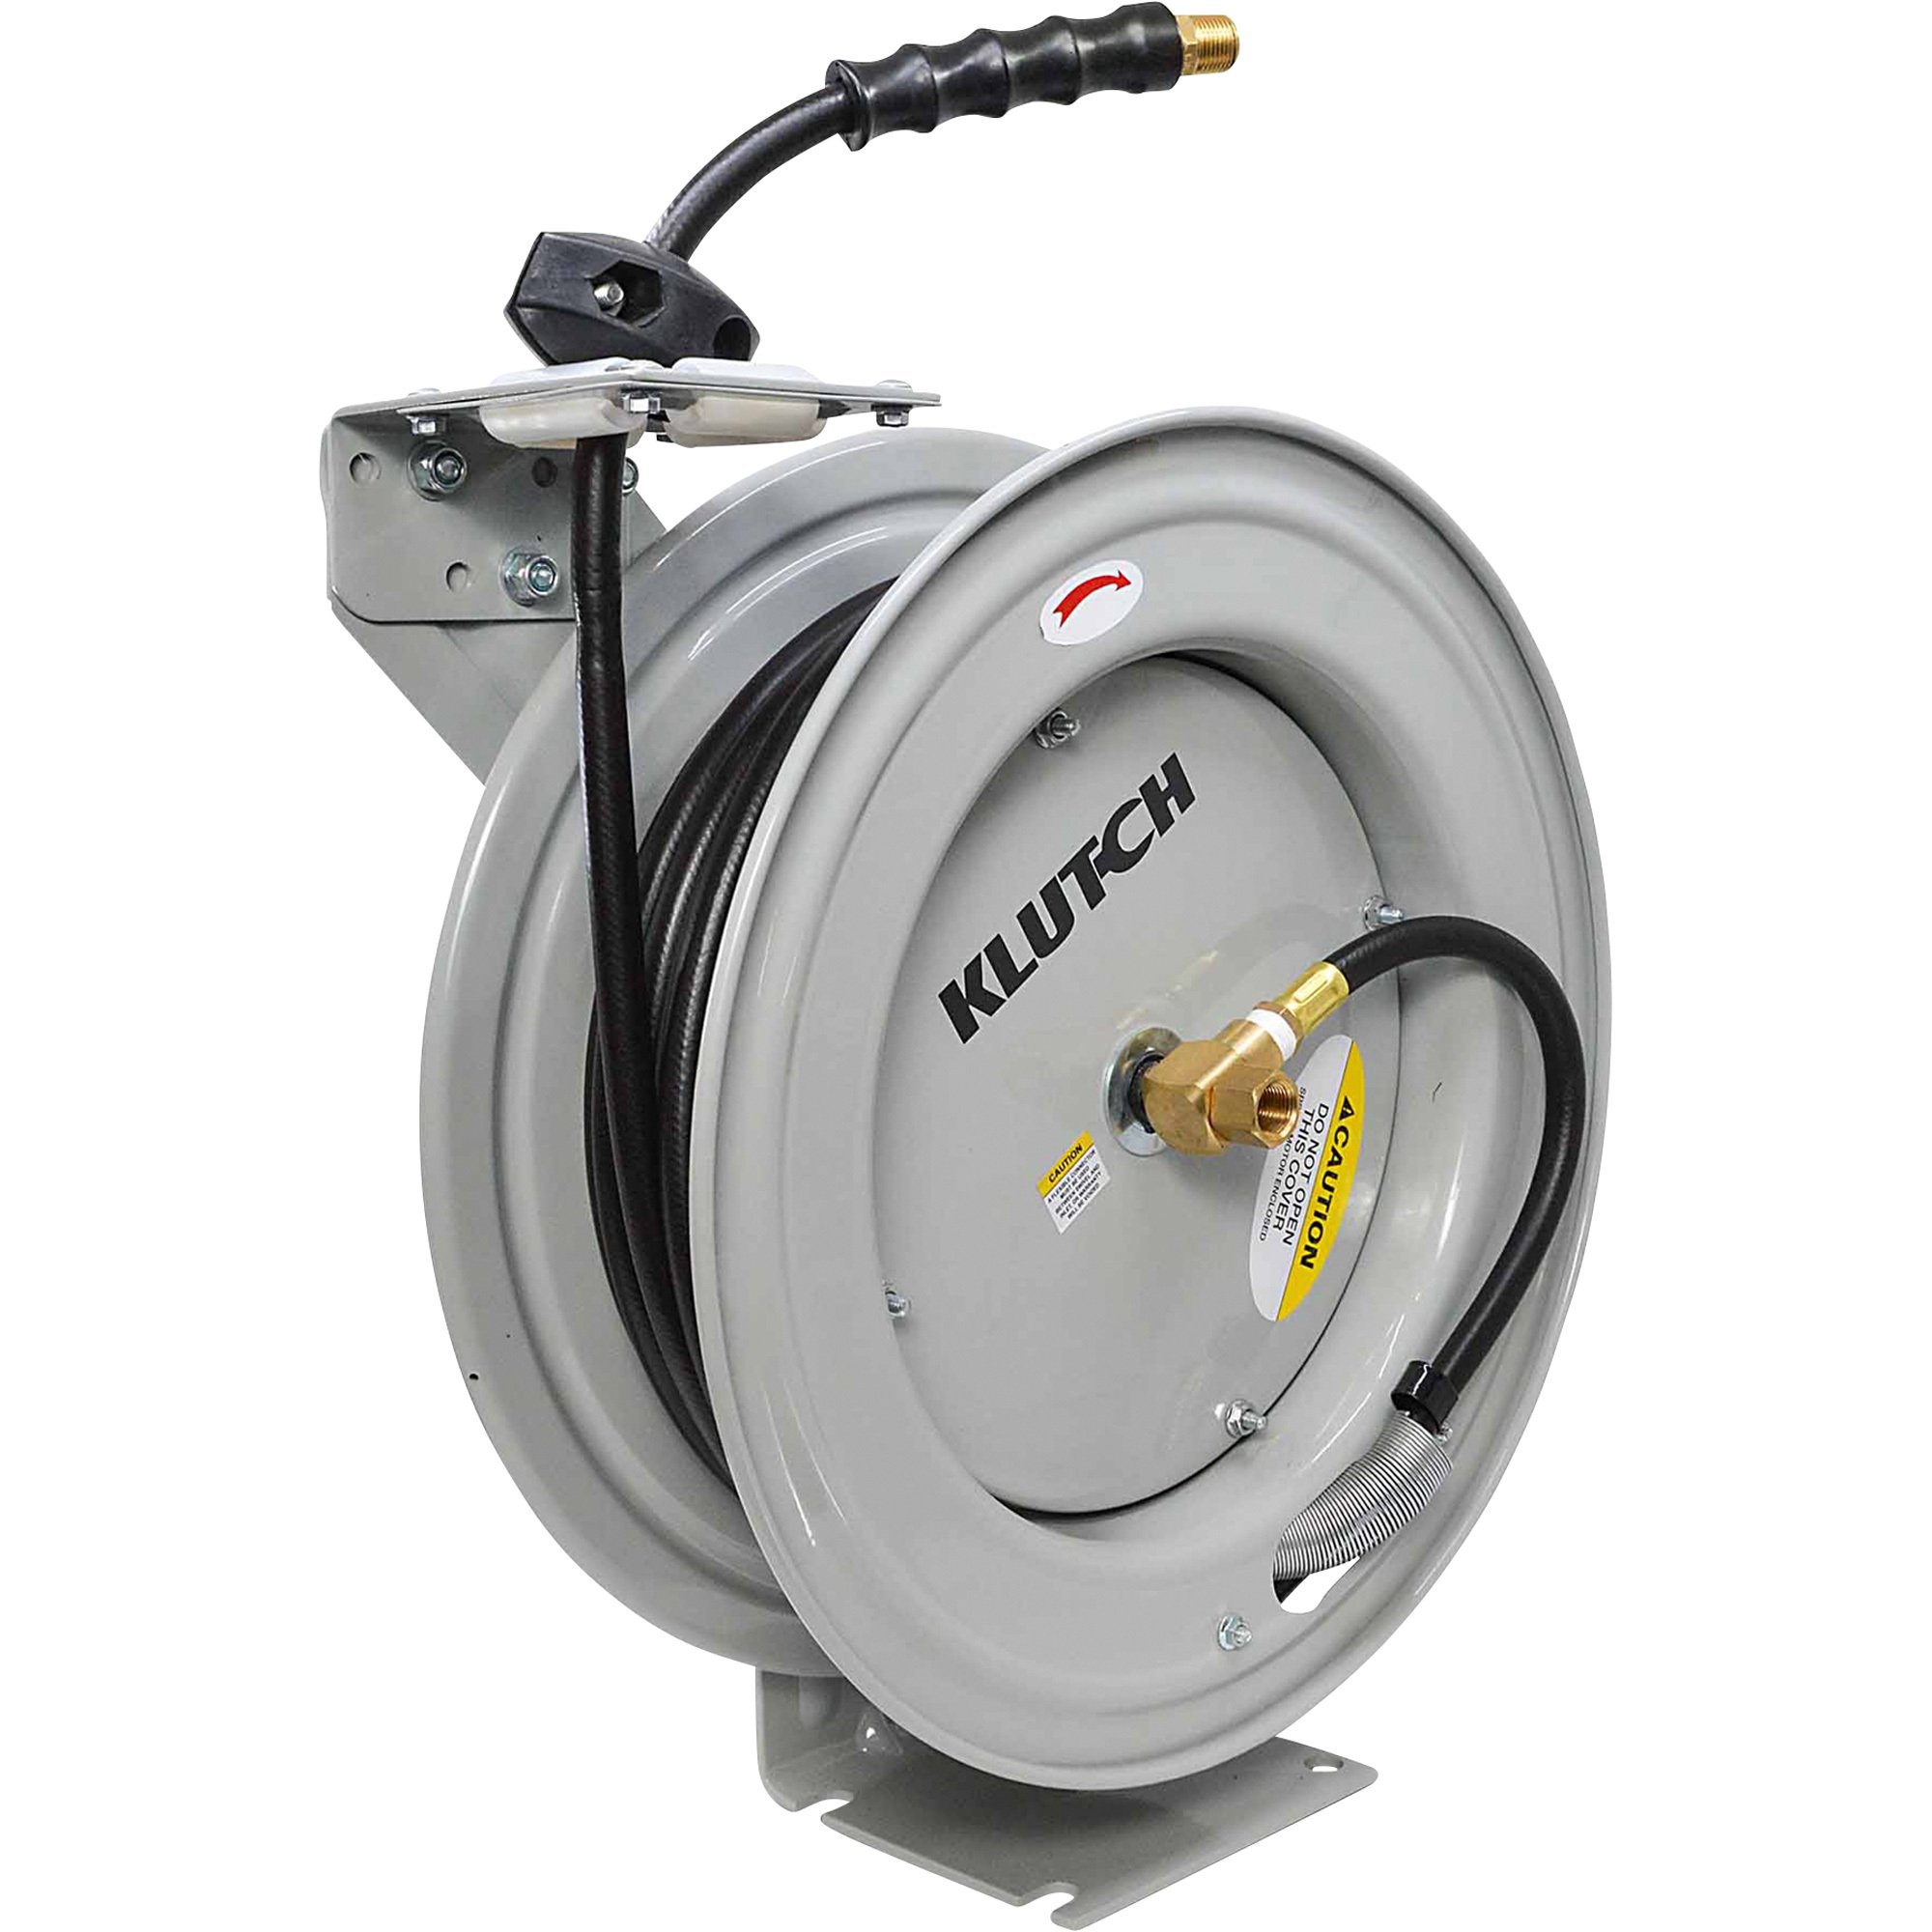 Klutch Auto-Rewind Air Hose Reel, with 3/8in. x 75ft. Rubber Hose